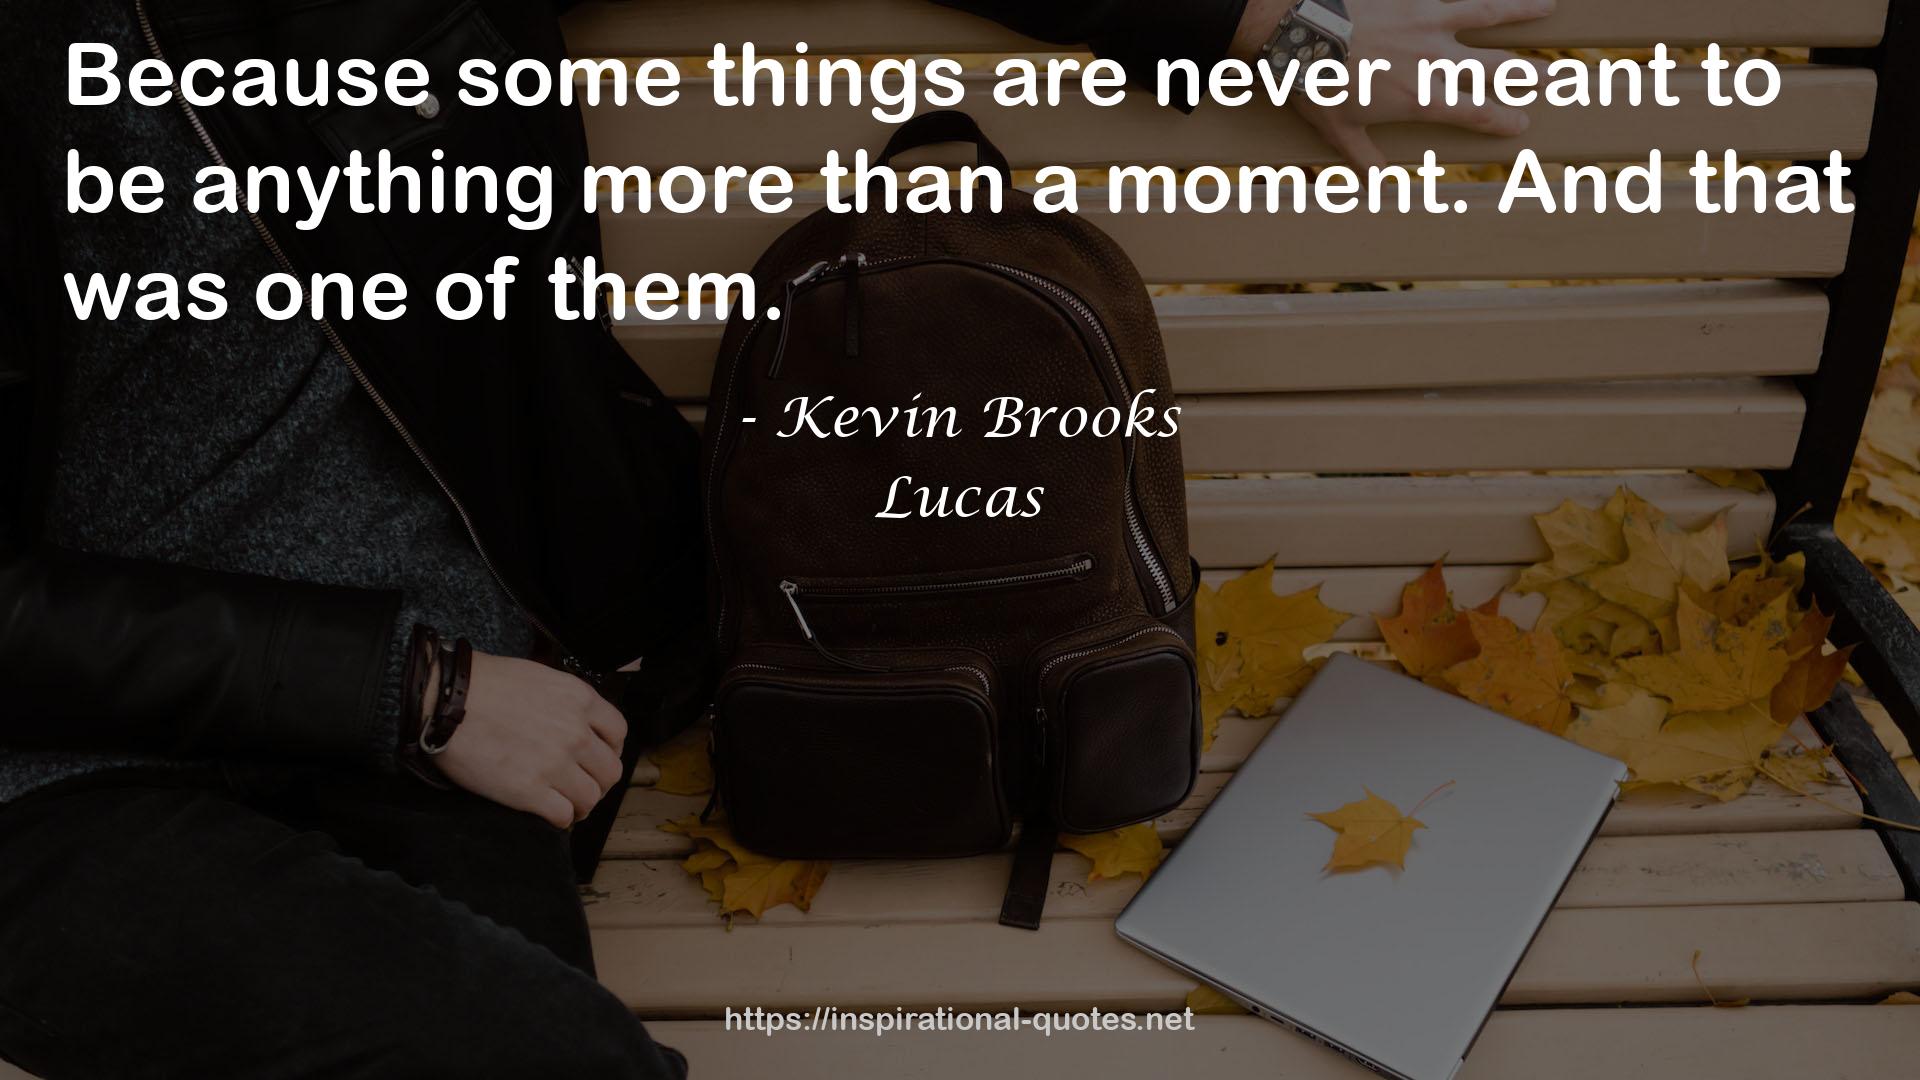 Kevin Brooks QUOTES